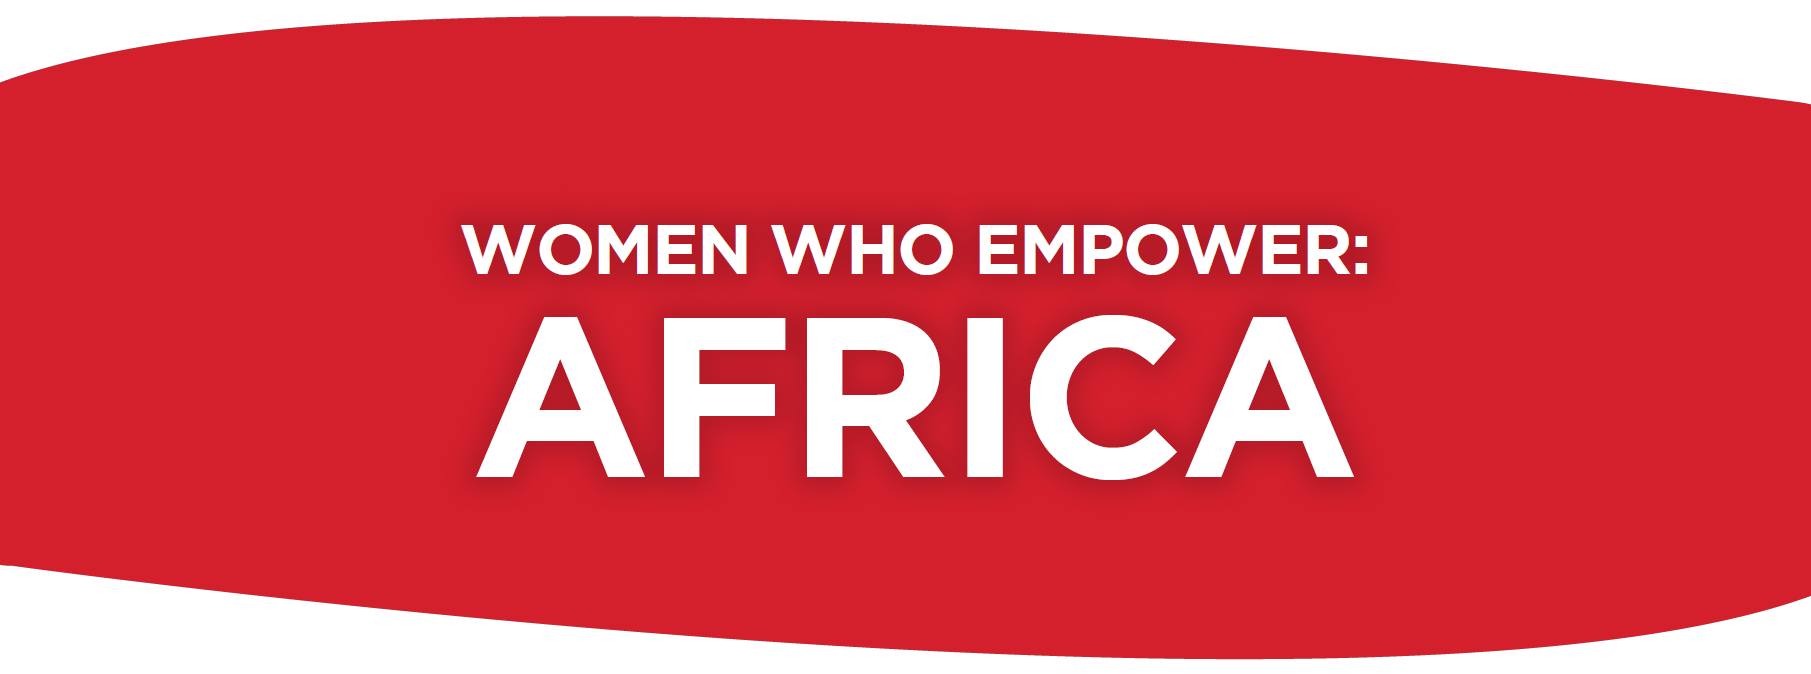 the words "women who empower africa"